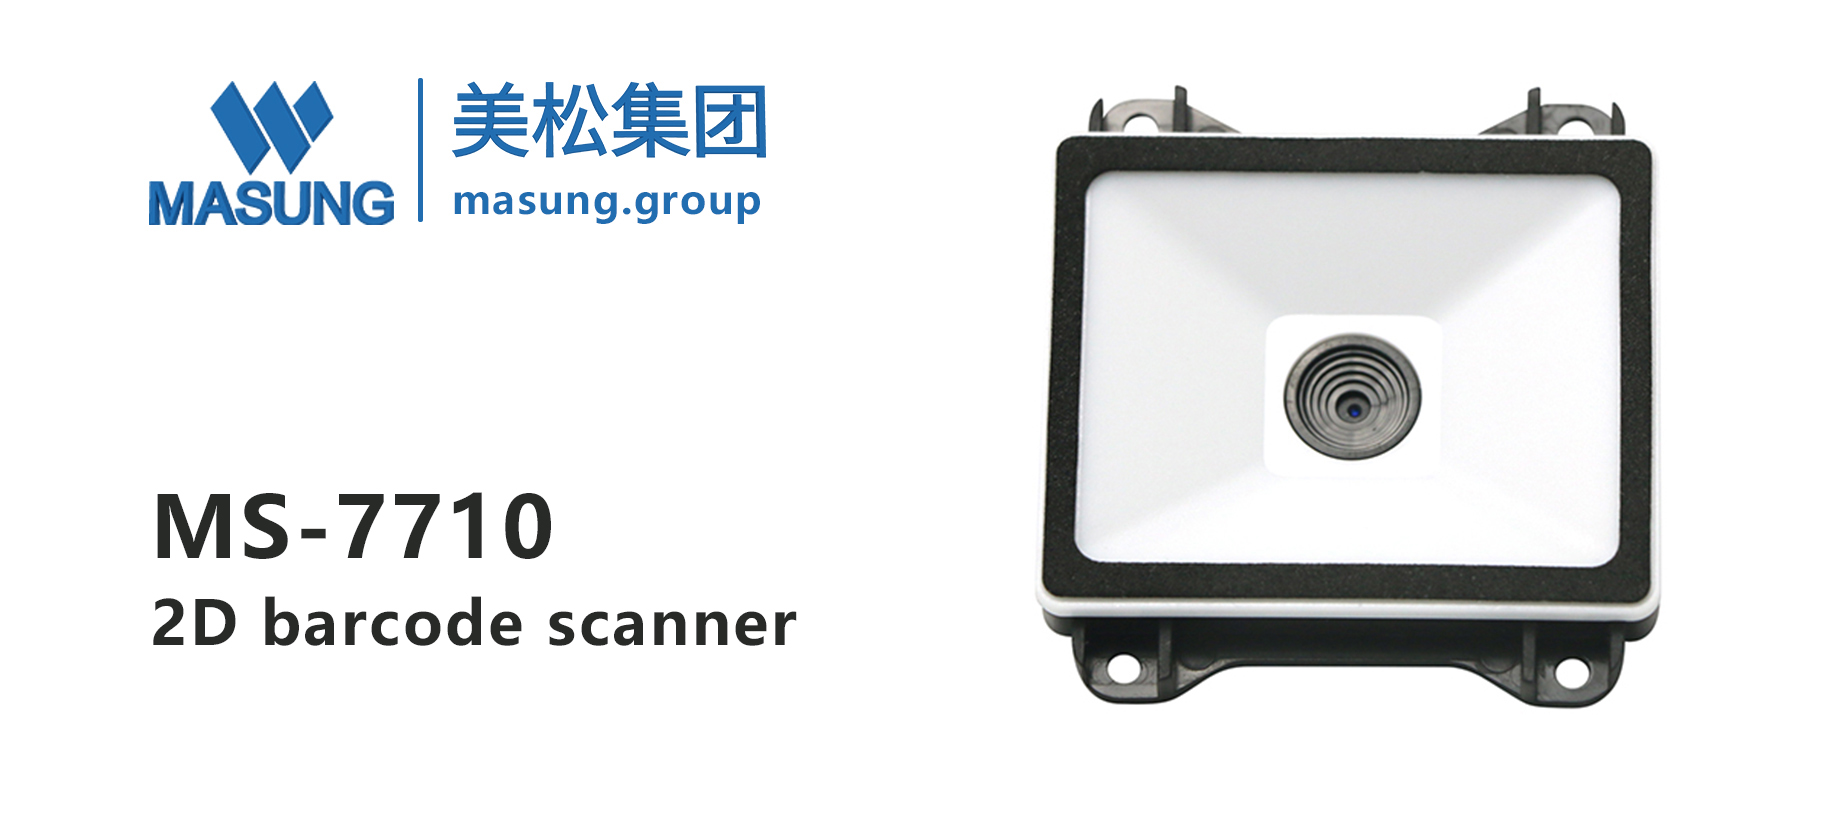 Customized scanning module of embedded barcode recognizer MS-7710